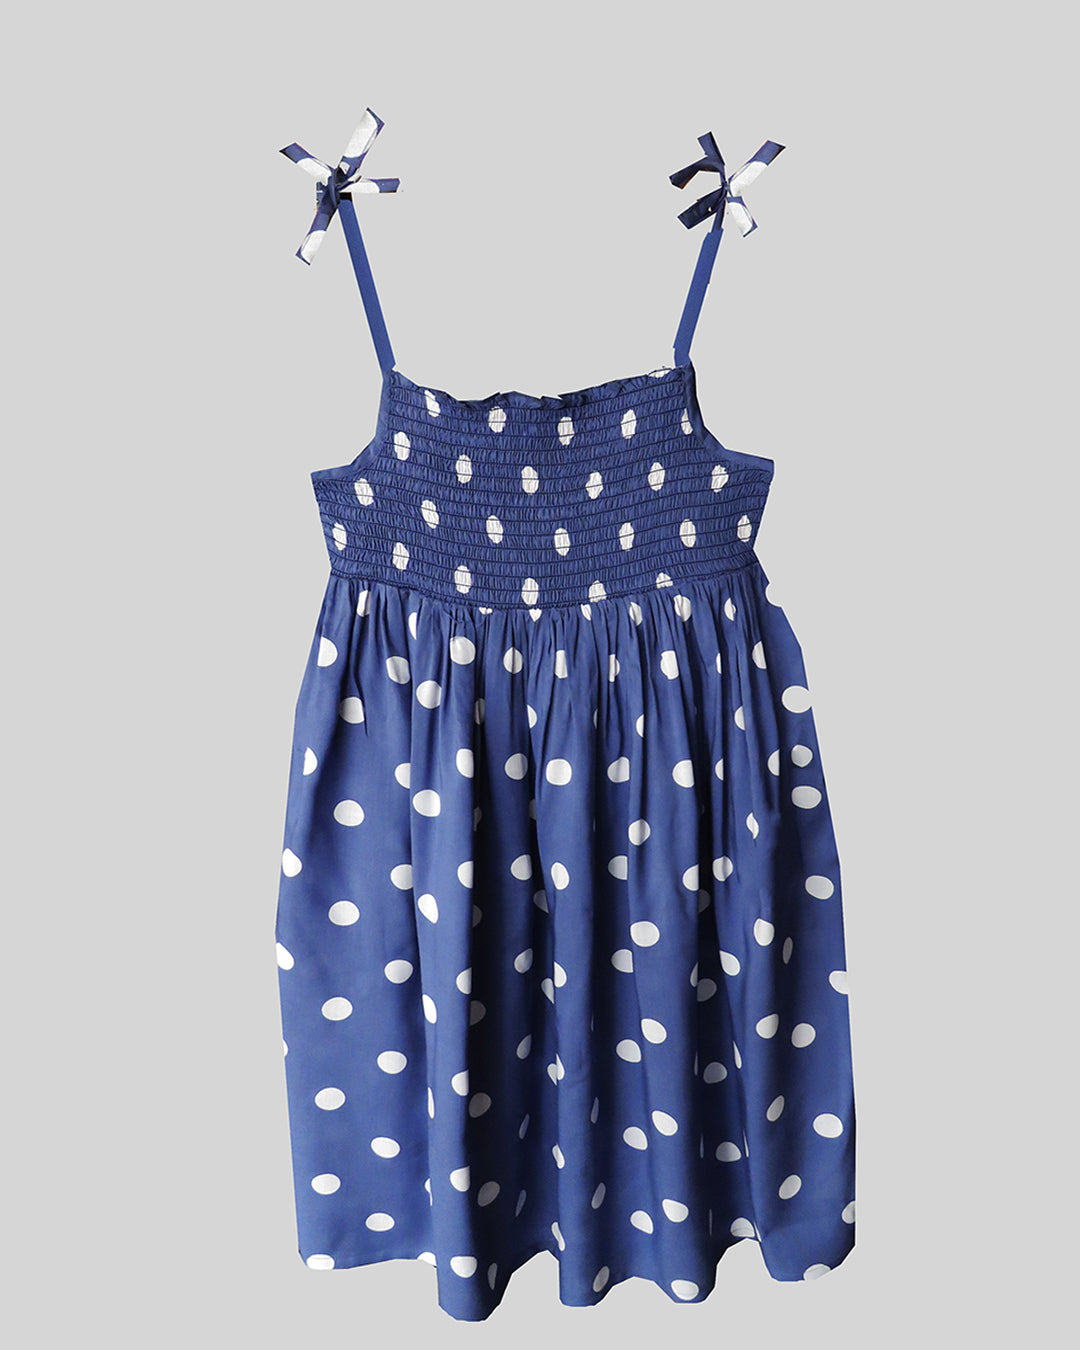 BLUE AND WHITE POLKA DOT SHOULDER STRAPS DRESS WITH SMOCKED AND GATHERED DETAILS